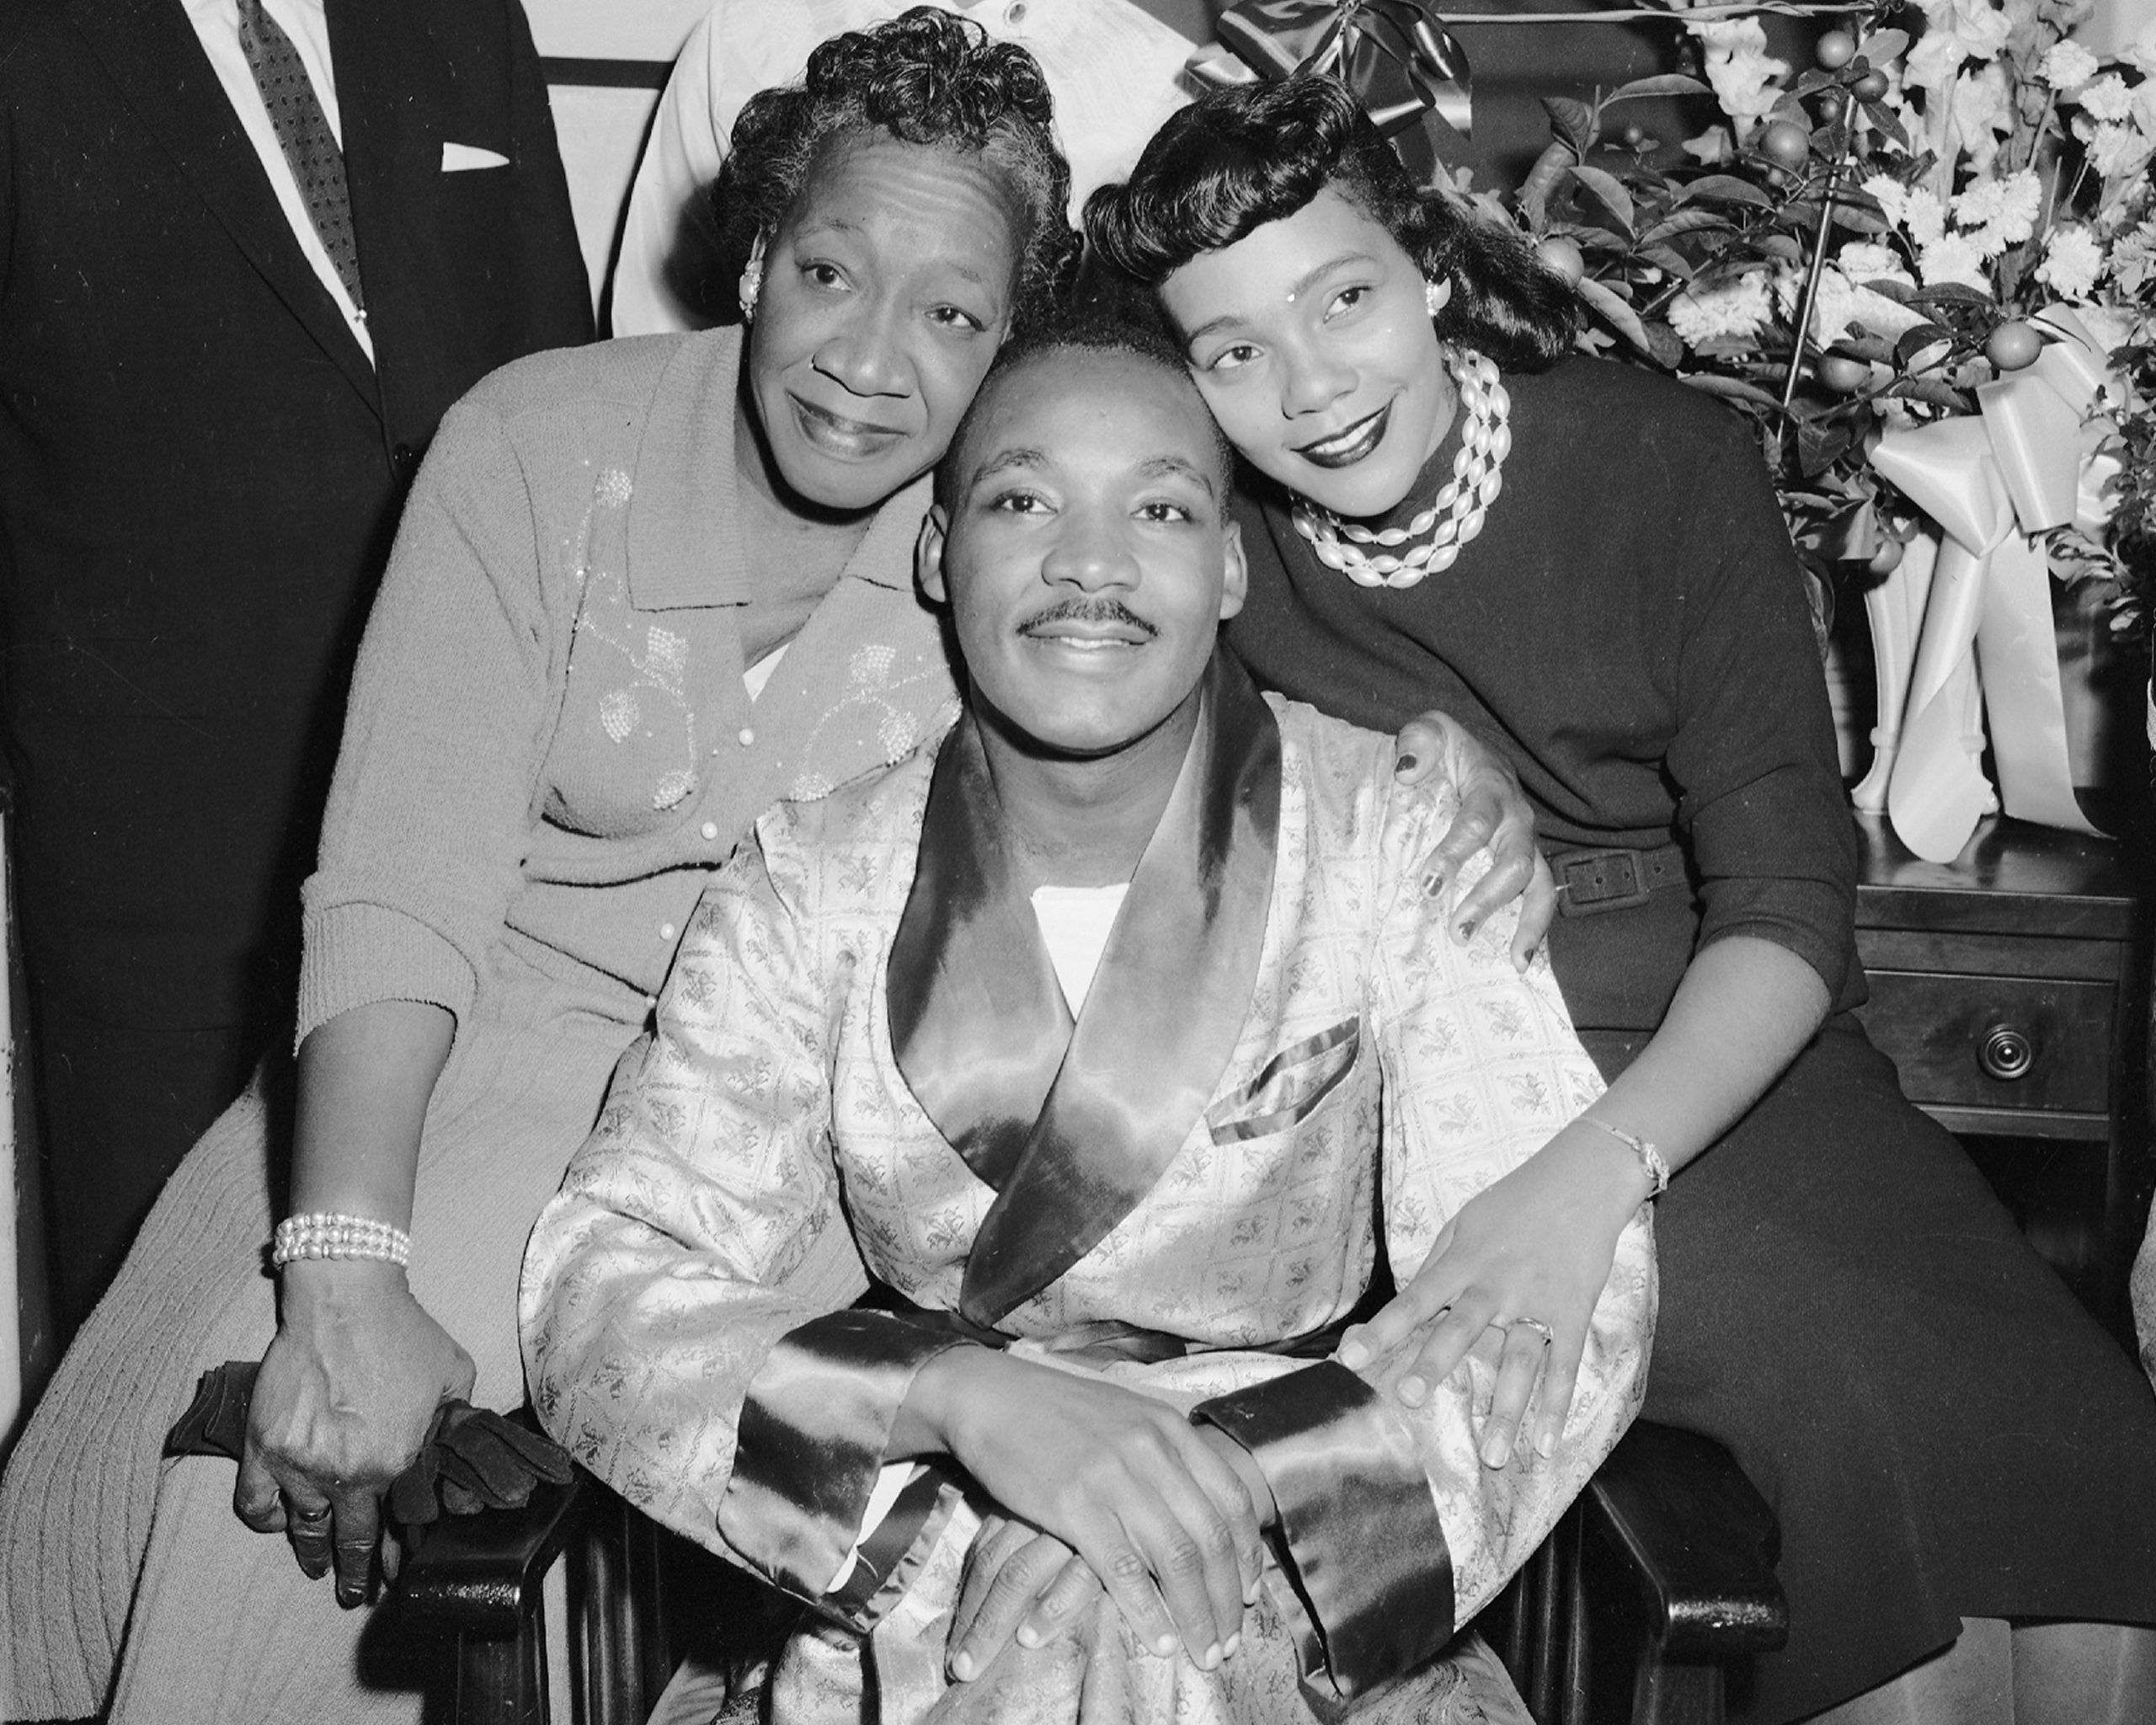 Celebrate Martin Luther King Jr. By Acknowledging The Contributions Of His Mother, Alberta King